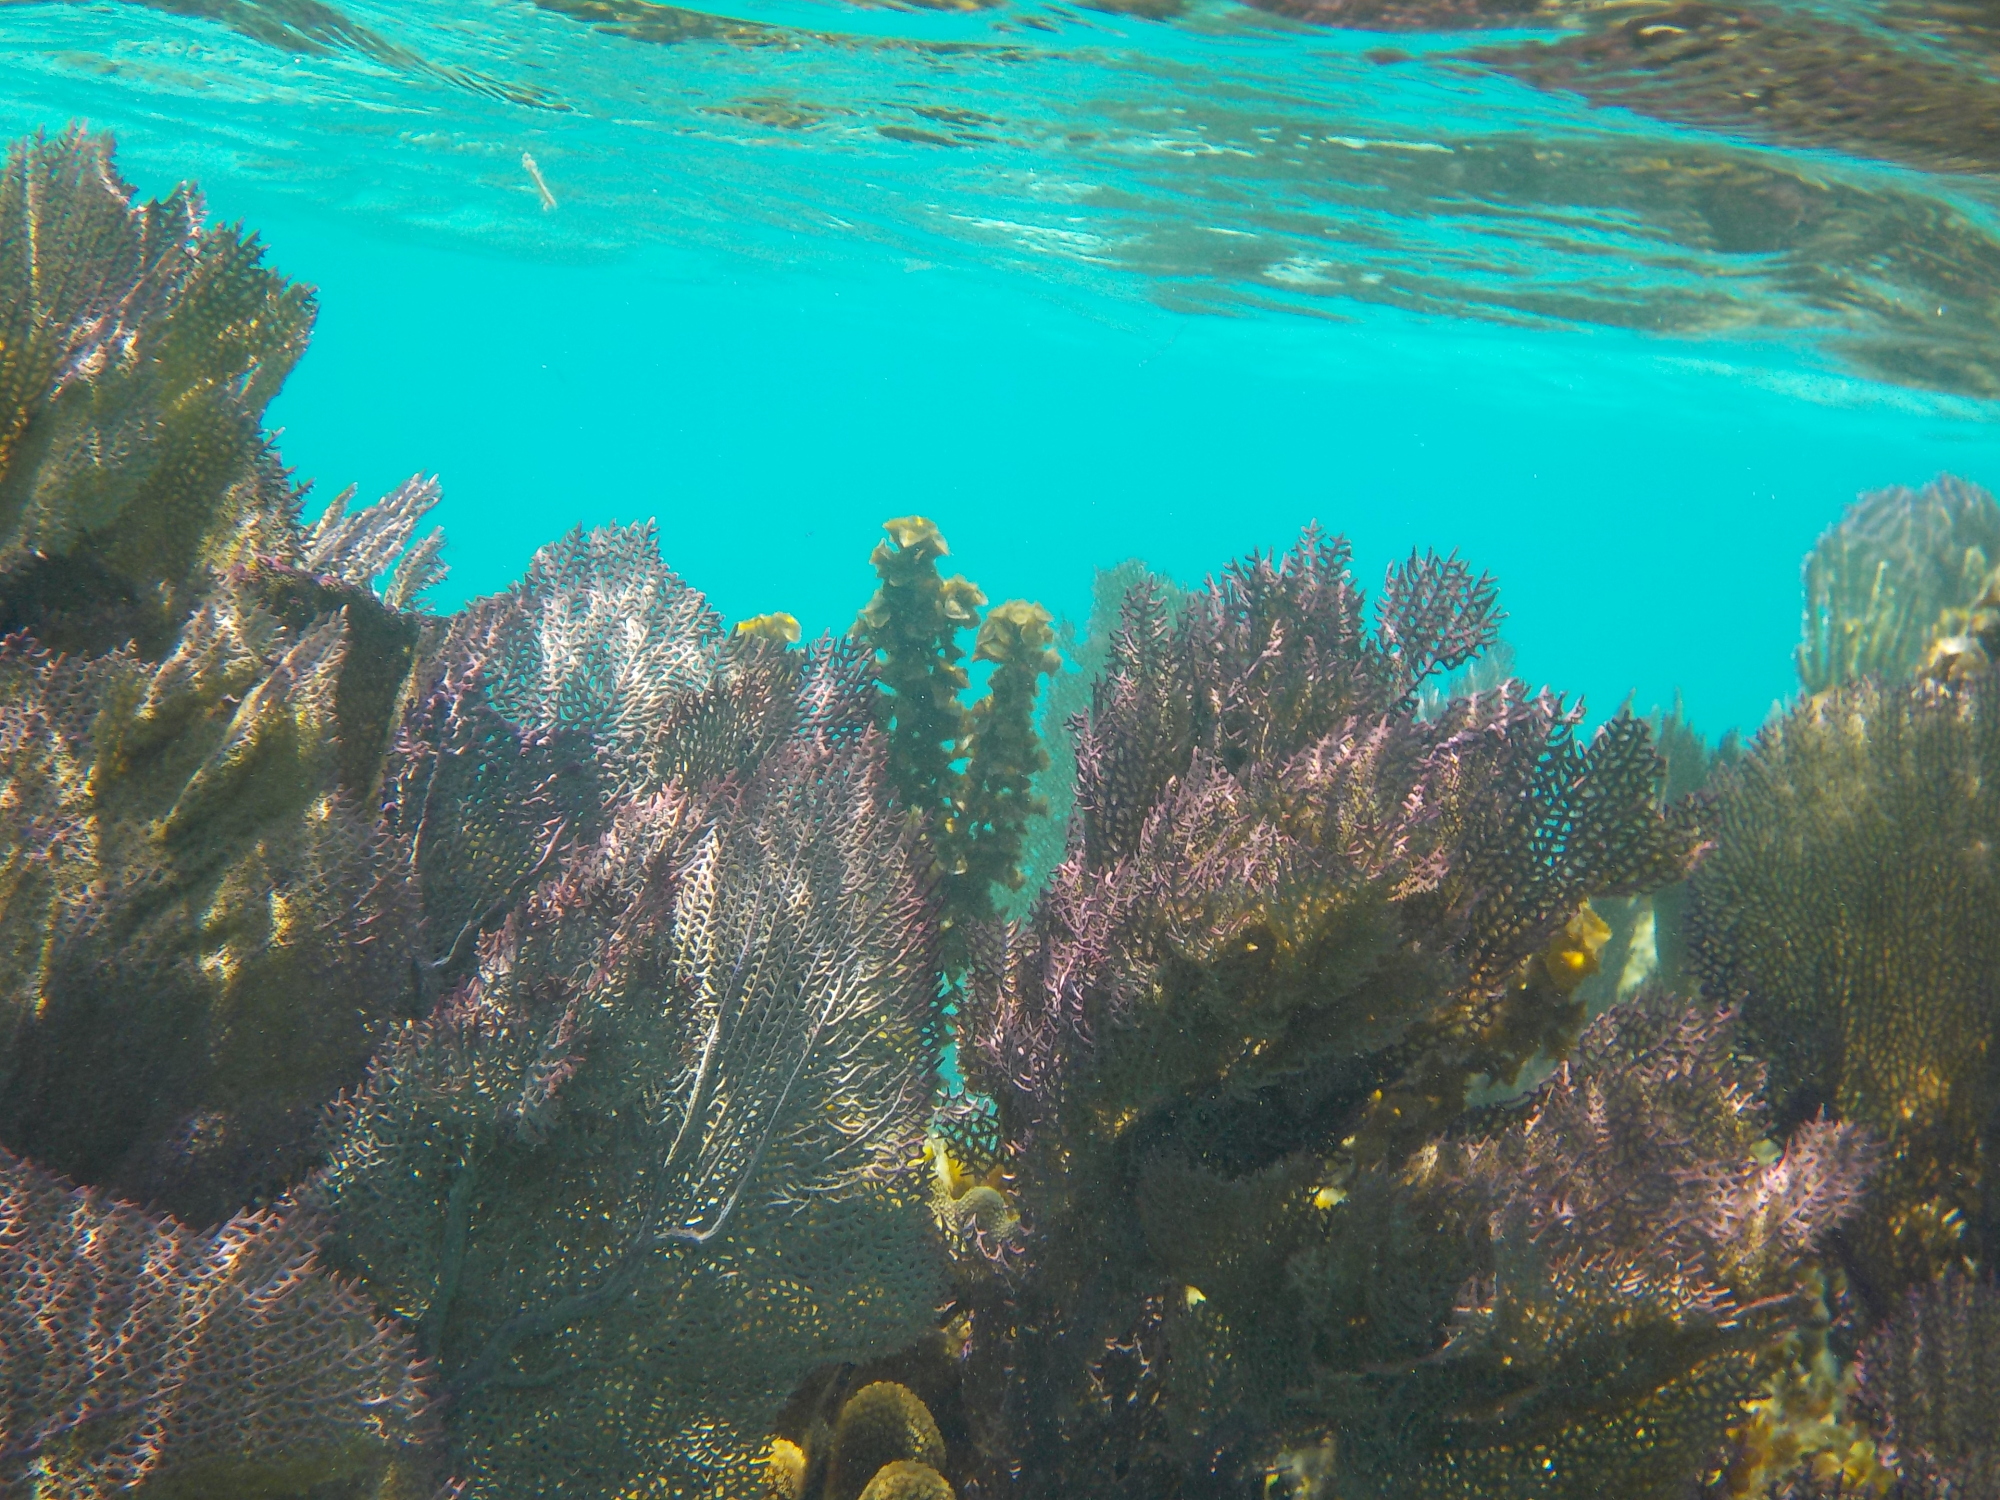 Fan corals on the Belize Barrier Reef | M.GRAY97, VIA WIKIMEDIA COMMONS / CC BY-SA-4.0